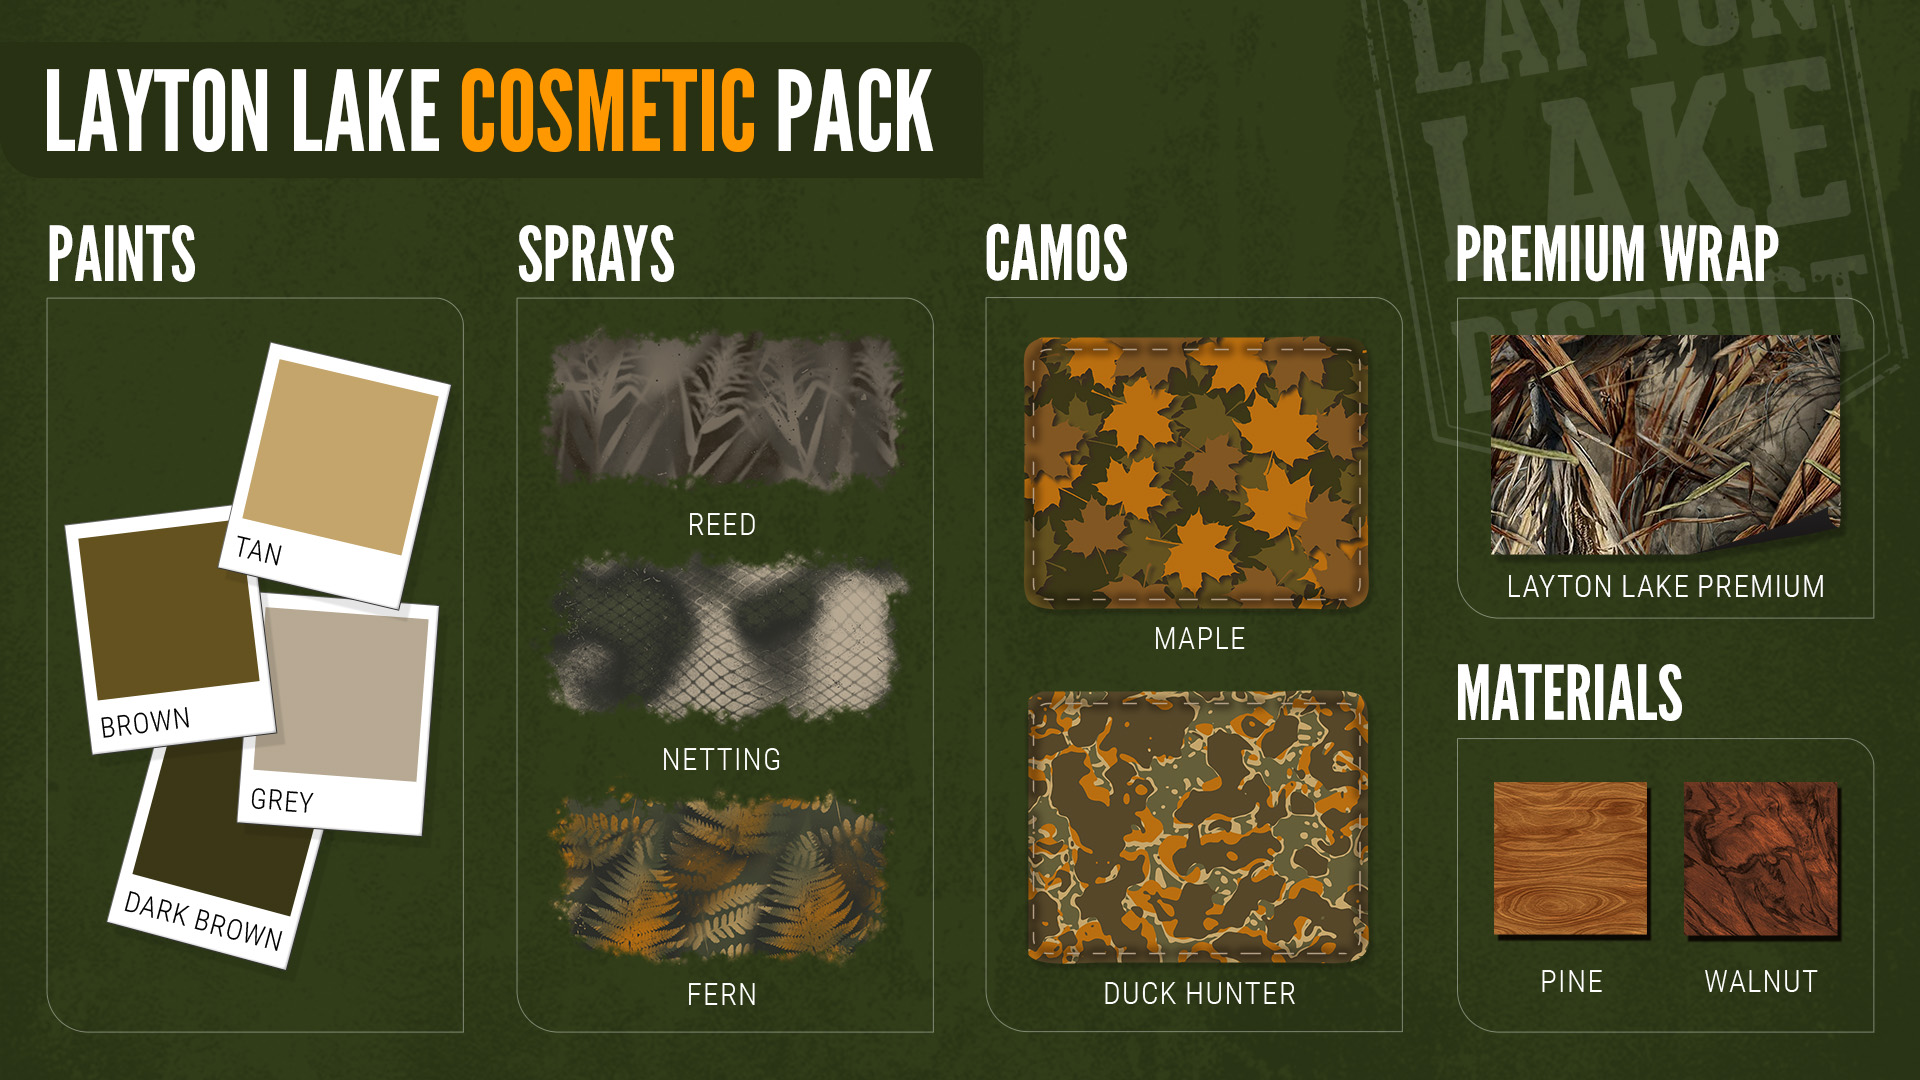 Infographic: The Layton Lake Cosmetic Pack contains a varied combination of 12 Paints, Sprays, Woods, Camos, and a Wrap.